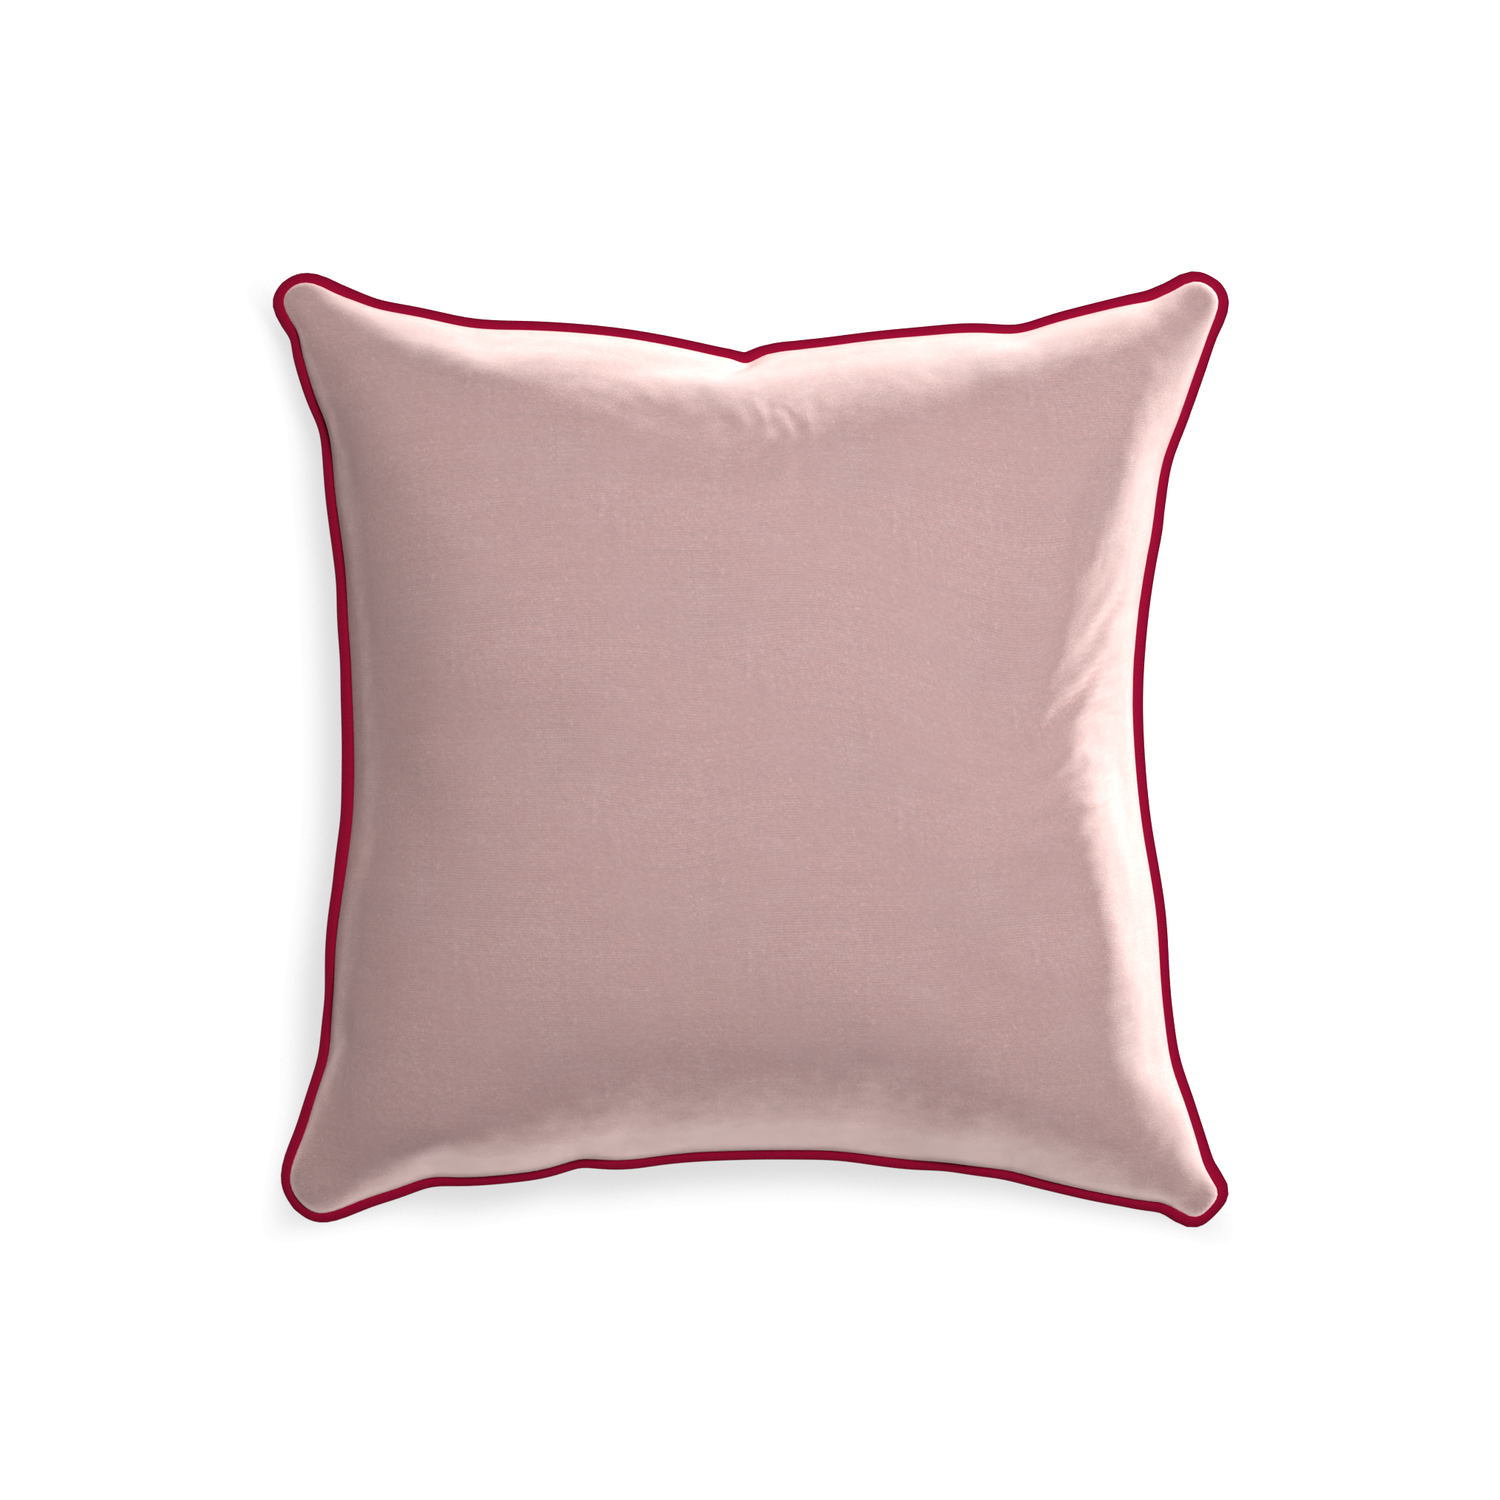 20-square mauve velvet custom pillow with raspberry piping on white background